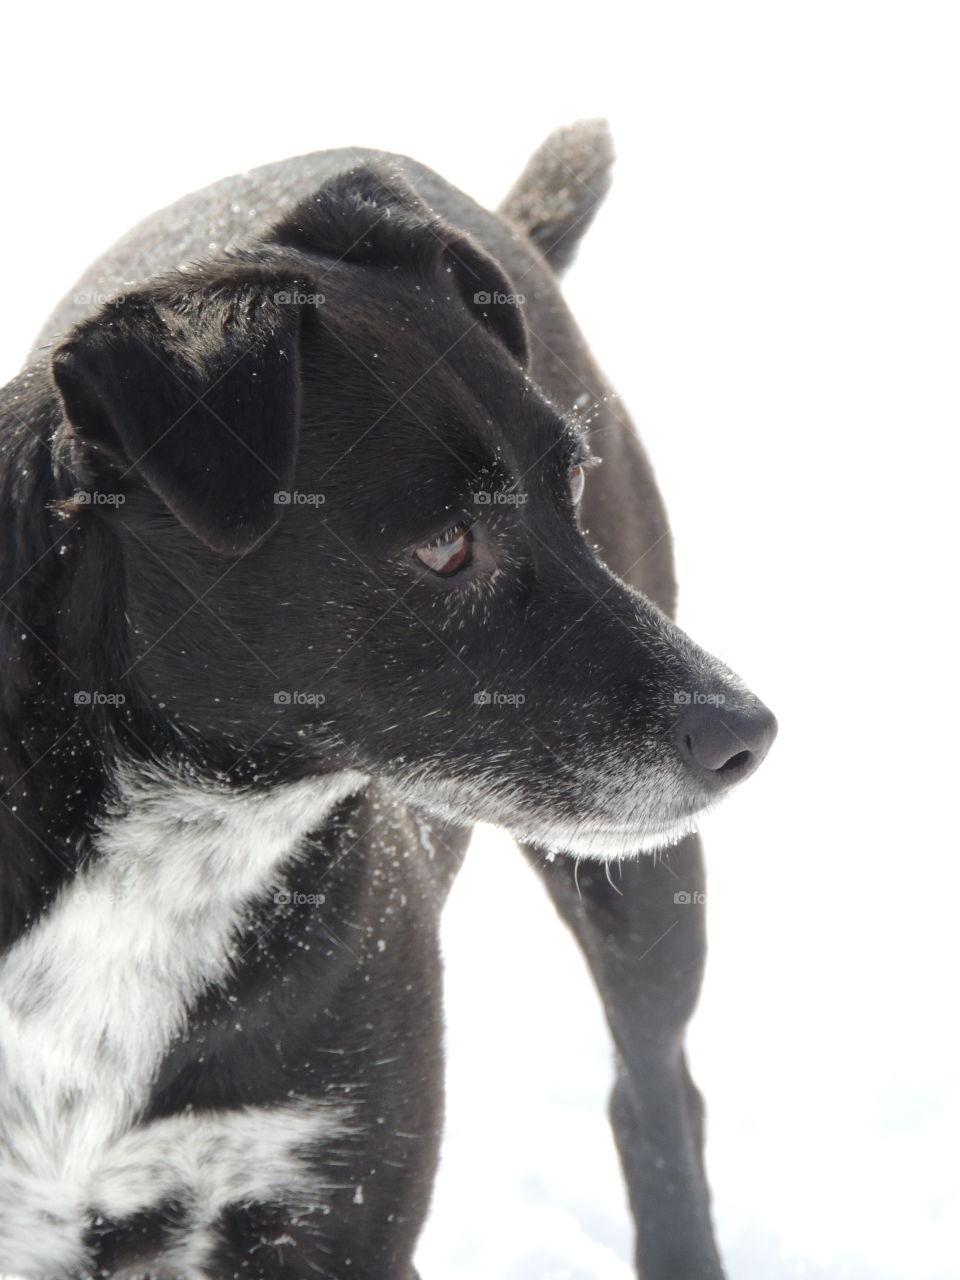 Black and white dog looking to the side in the snow